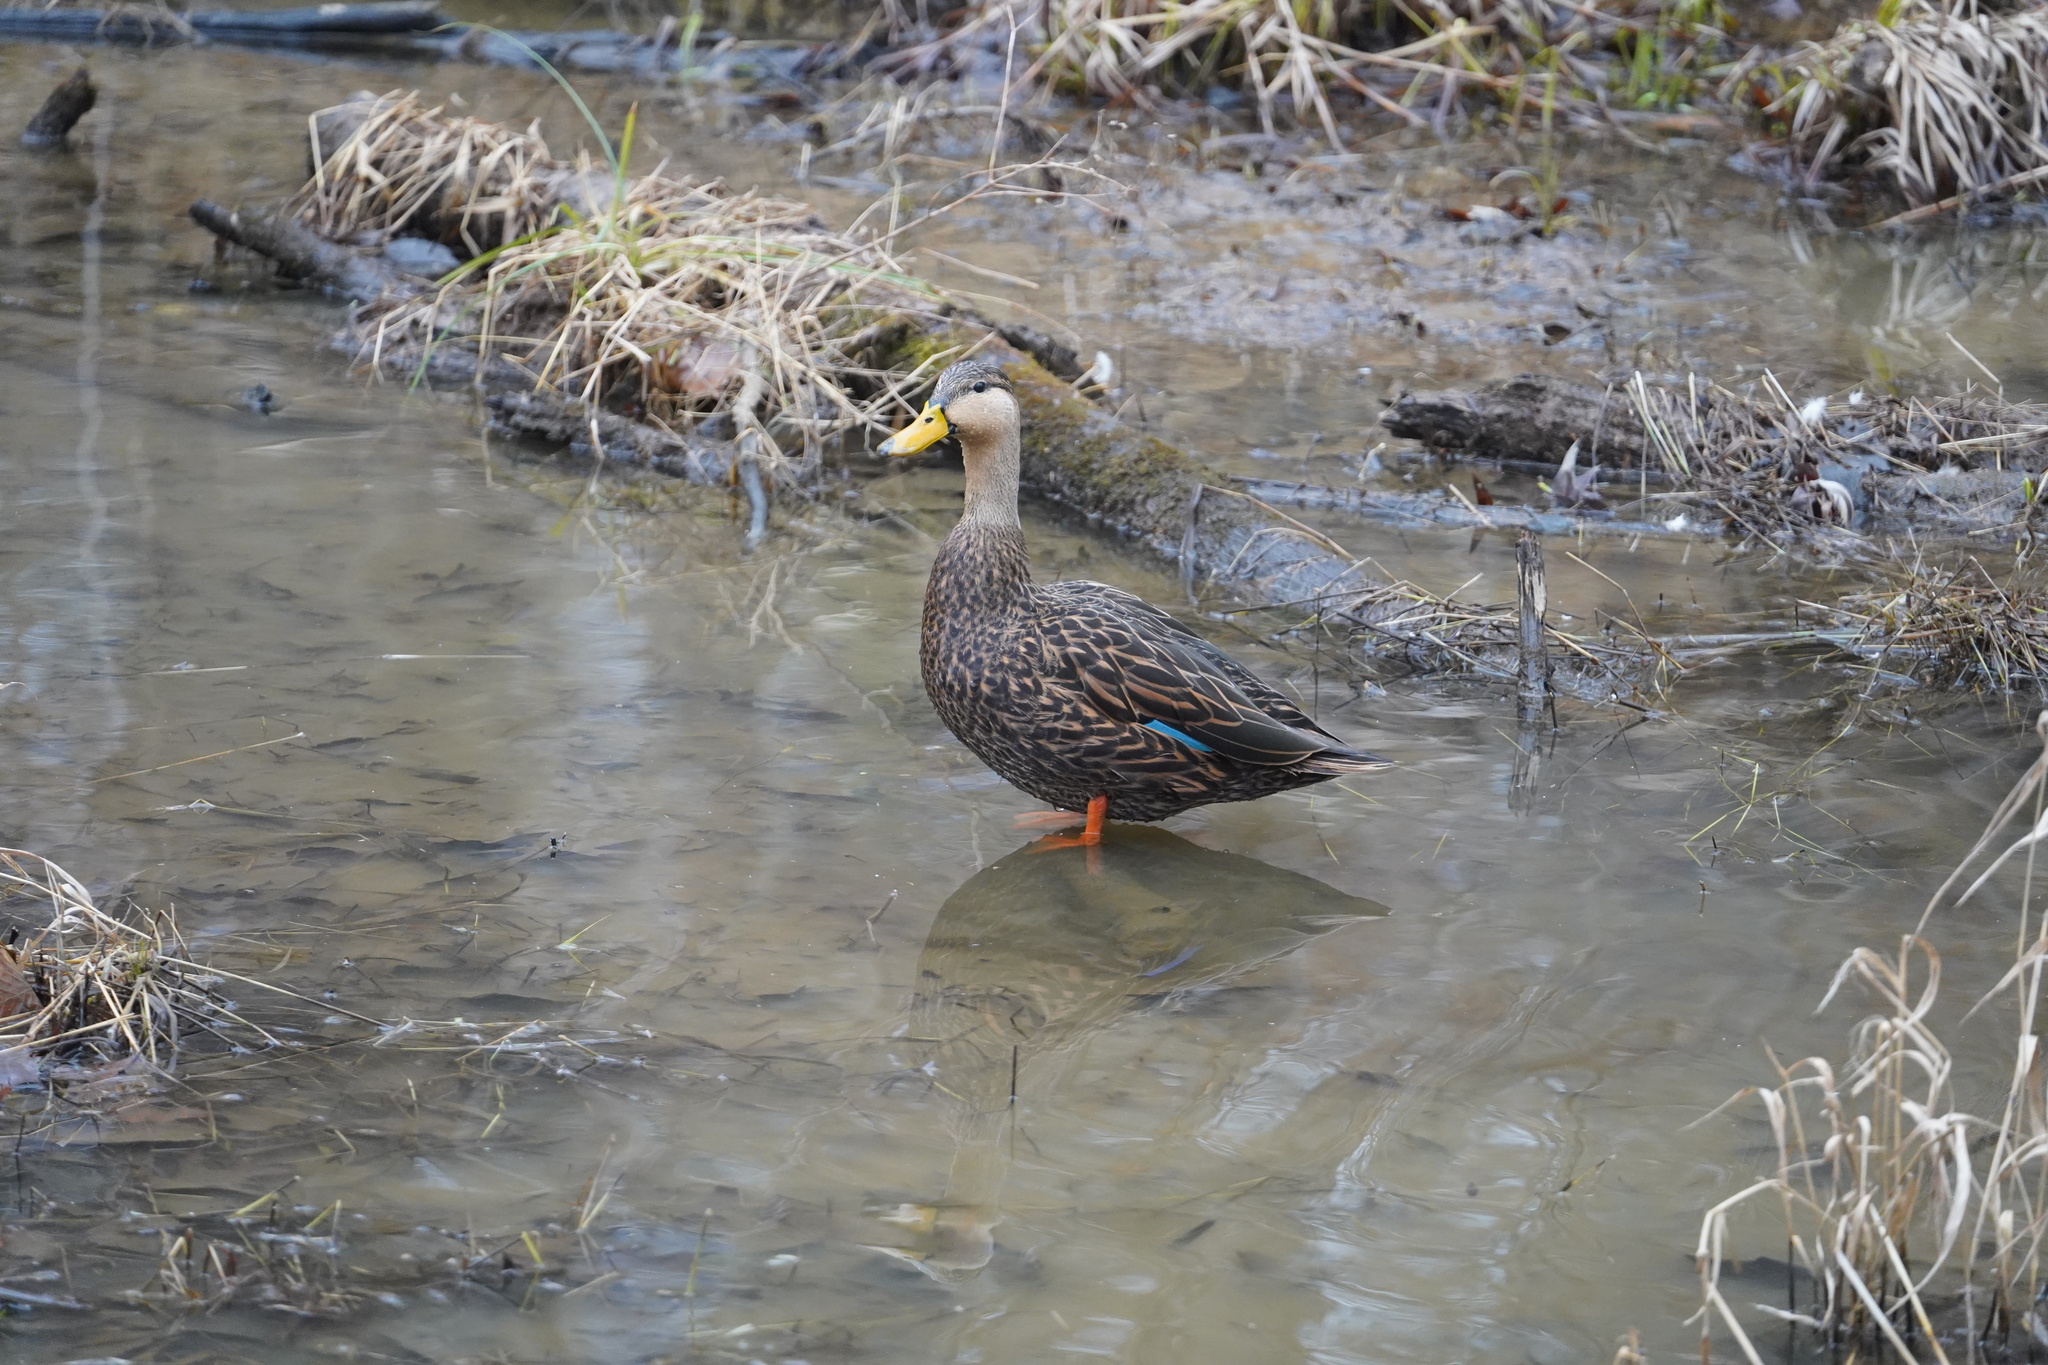 Not a Mallard: Lookalike Duck Species Spotted in Md. for 1st Time